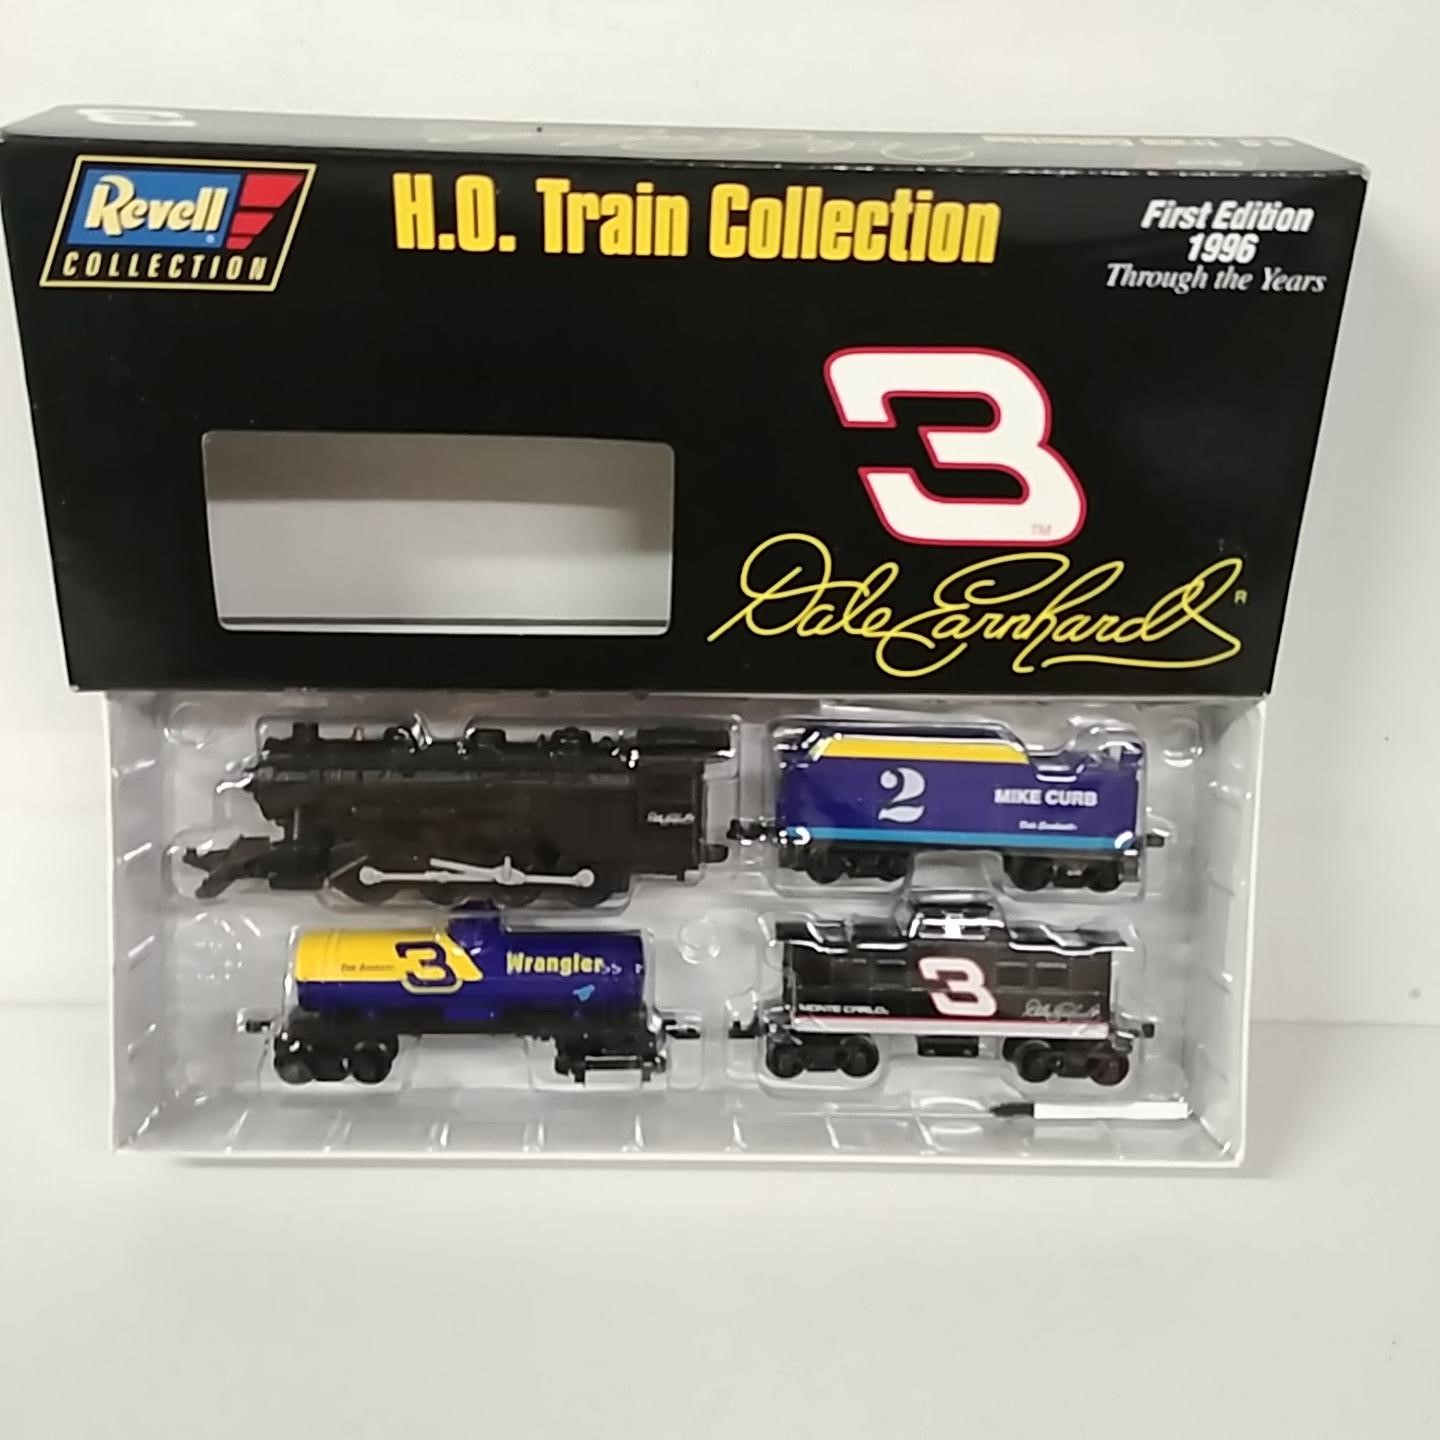 1996 Dale Earnhardt "Through The Years" Train Set